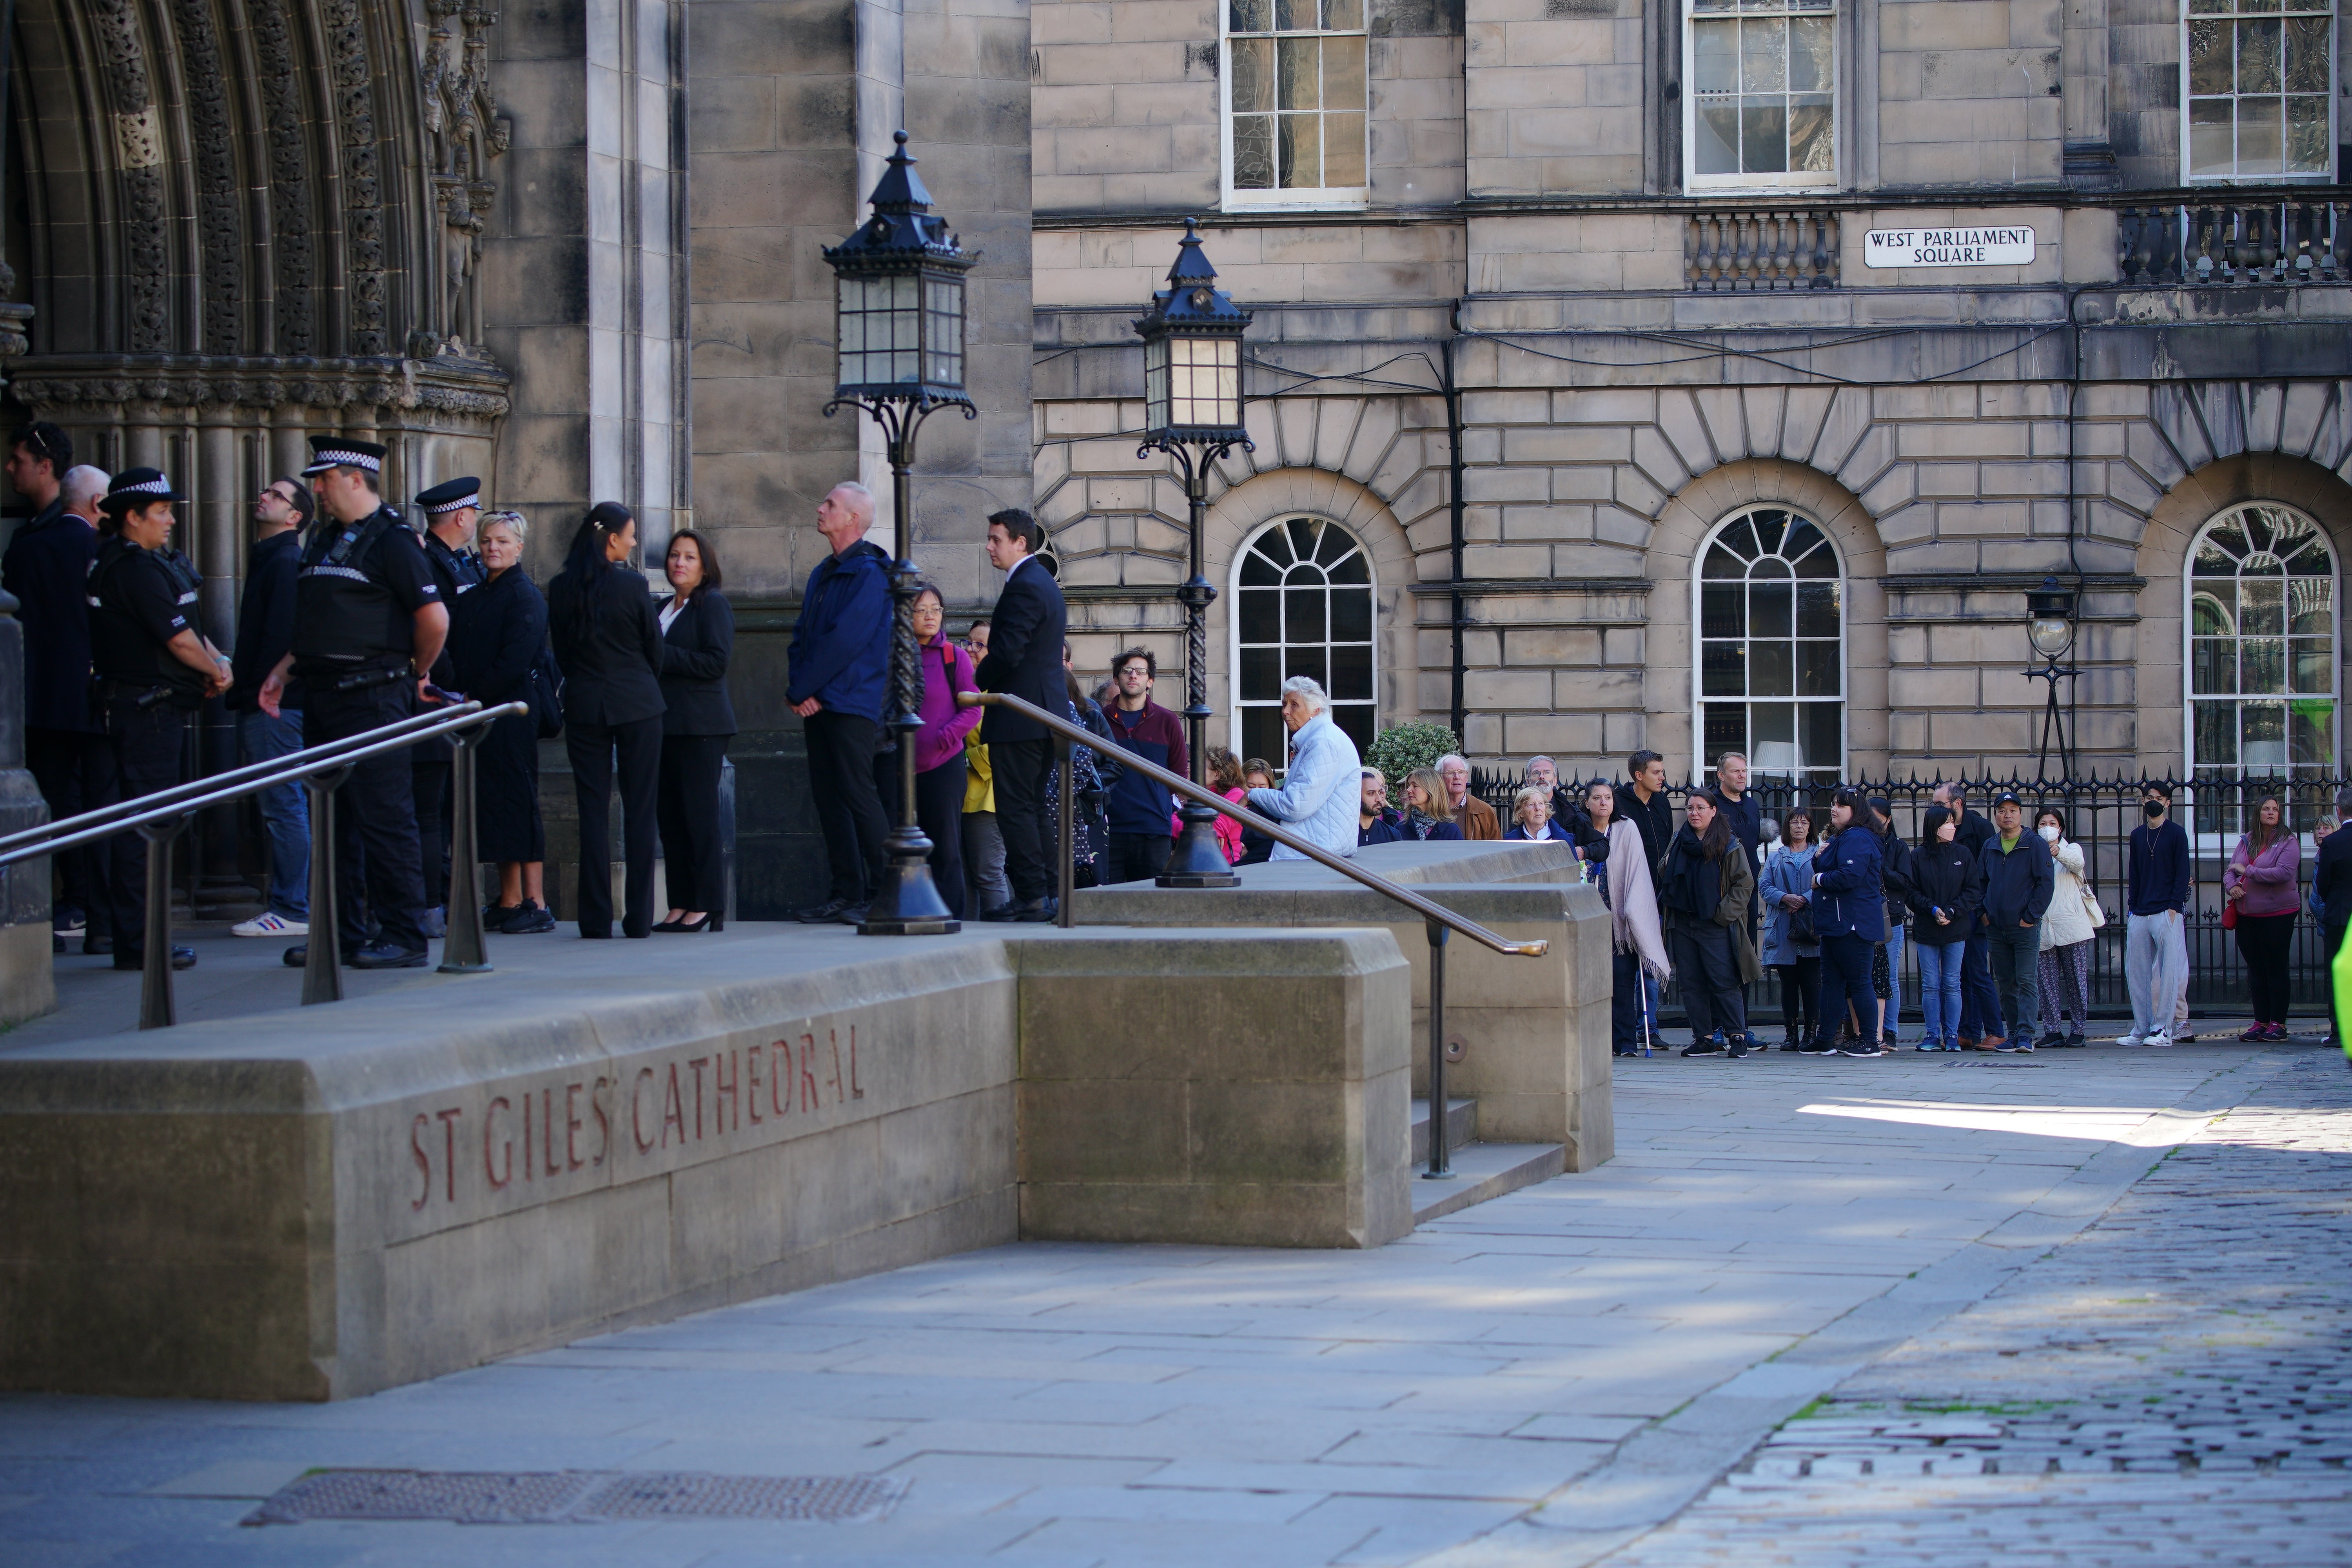 The queue to view the Queen’s coffin inside St Giles’ Cathedral in Edinburgh has been closed (Peter Byrne/PA)